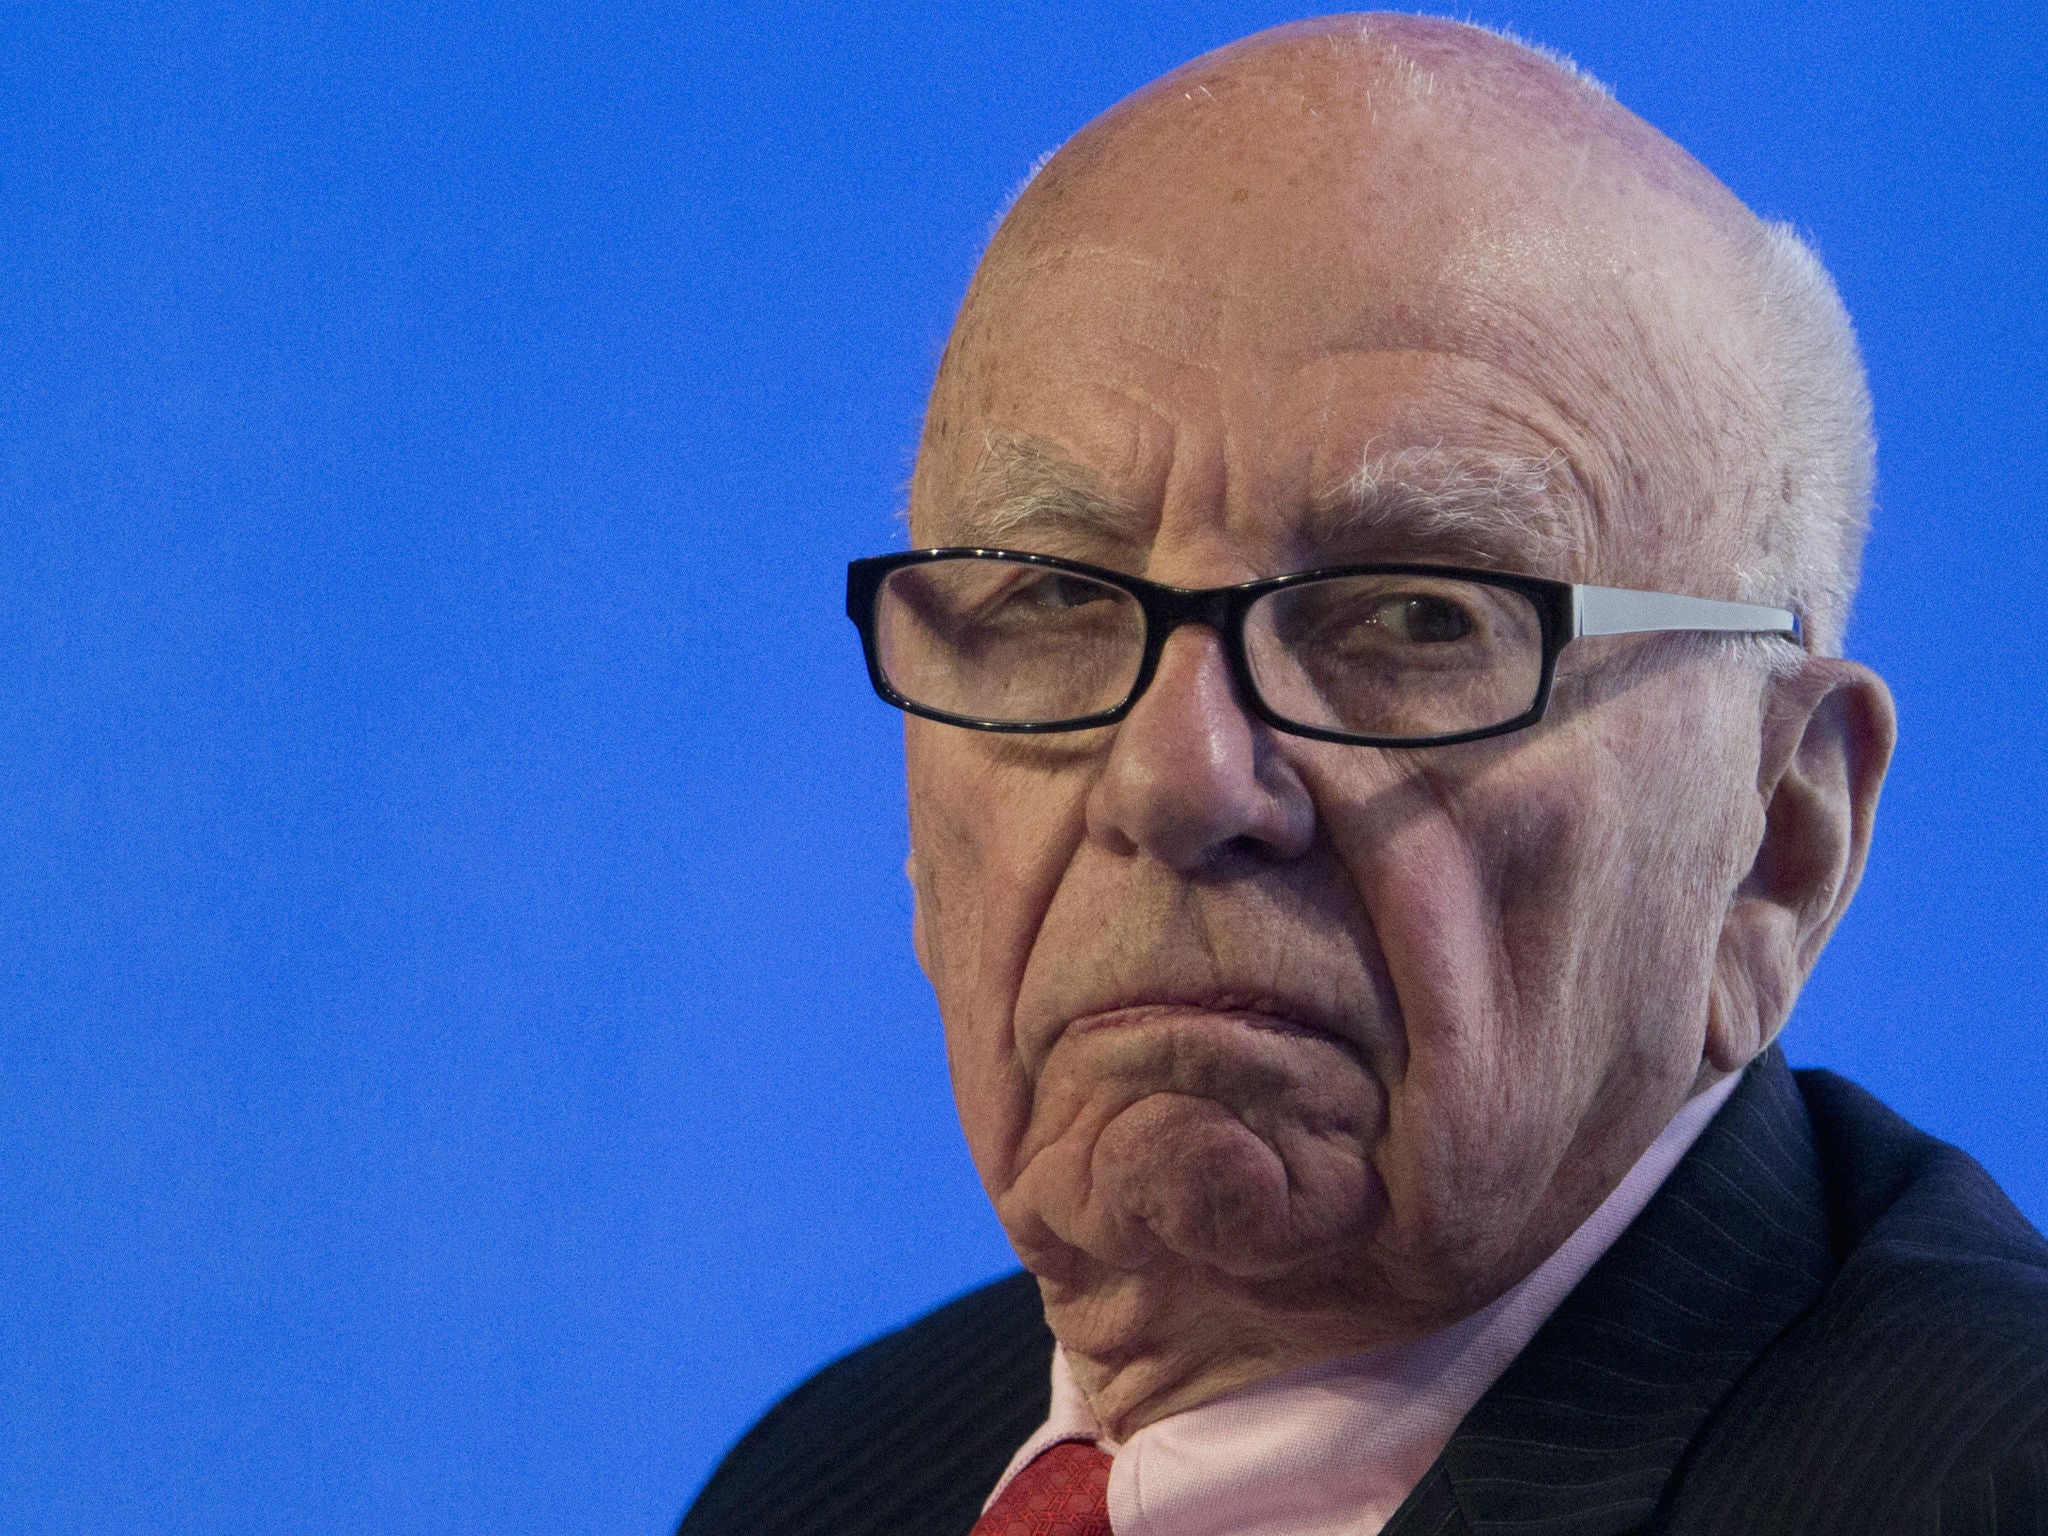 New media is coming to dominate not just Britain’s national voice, but the global voice in a way that Murdoch could only dream of